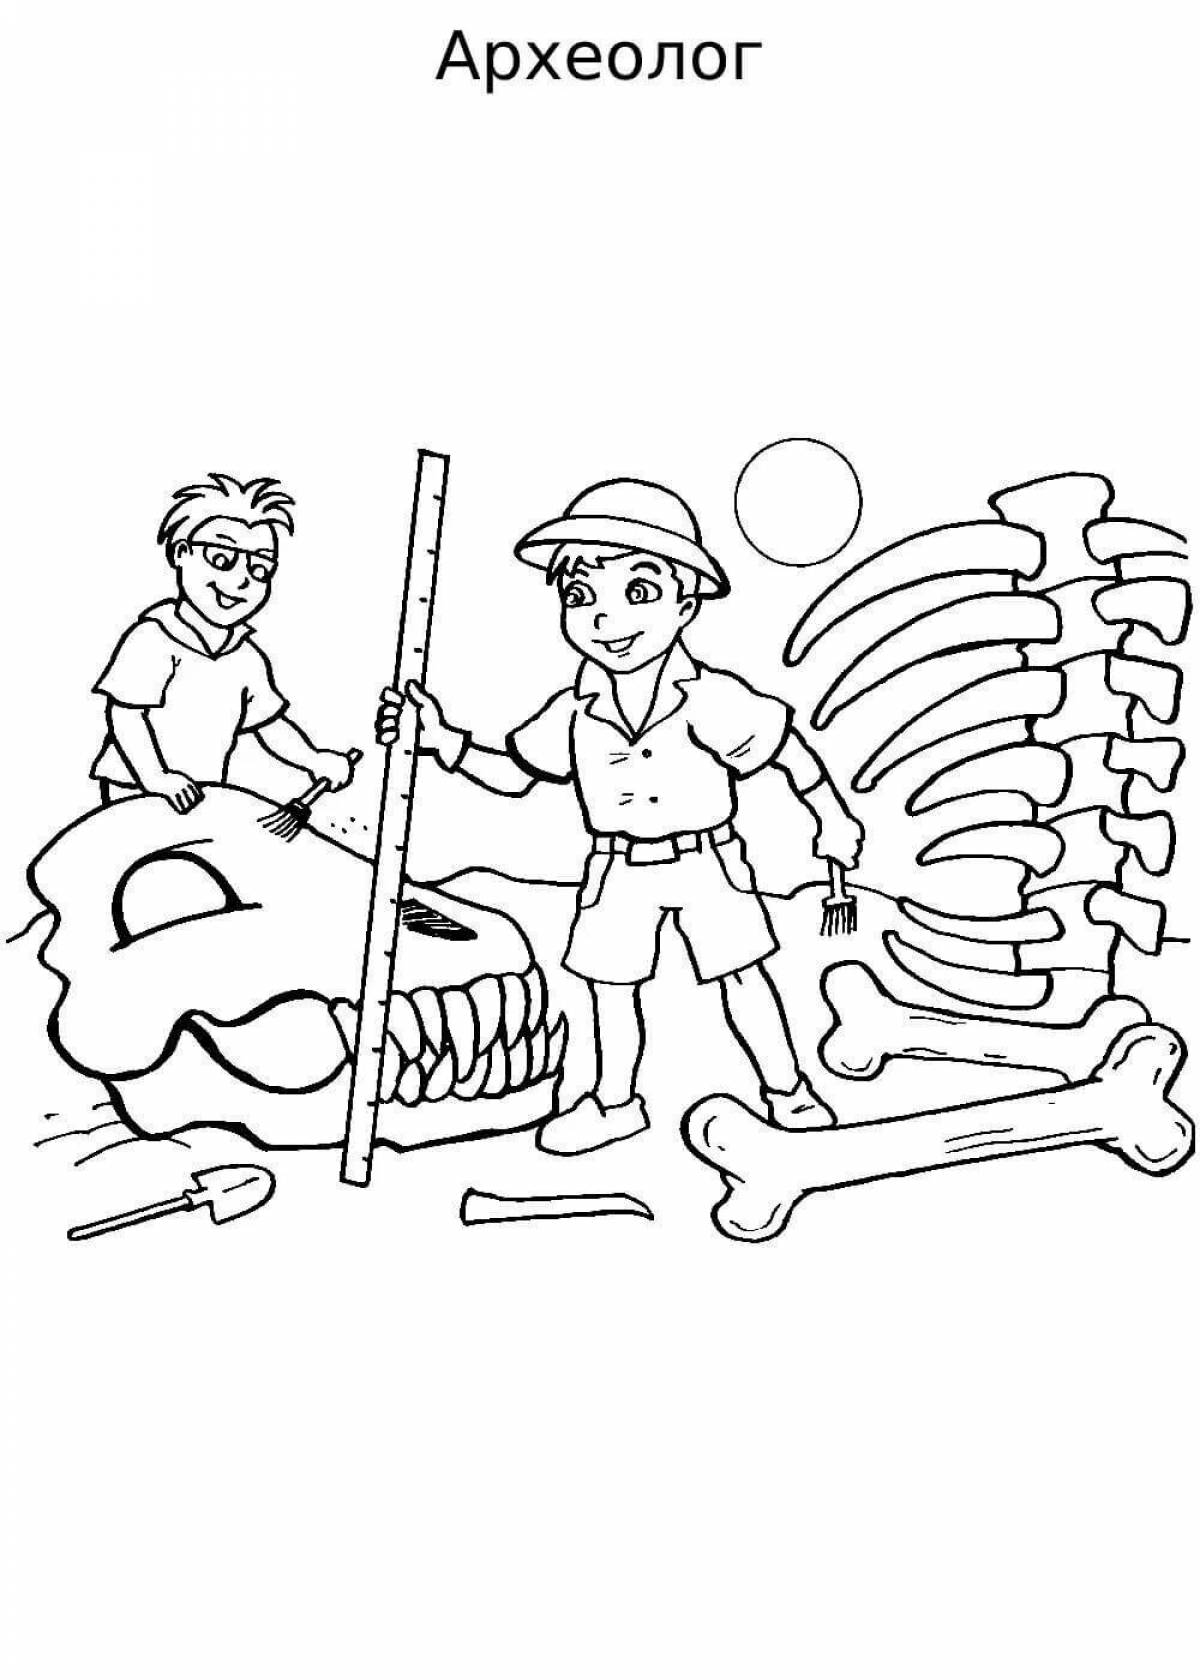 Fun archaeologist coloring book